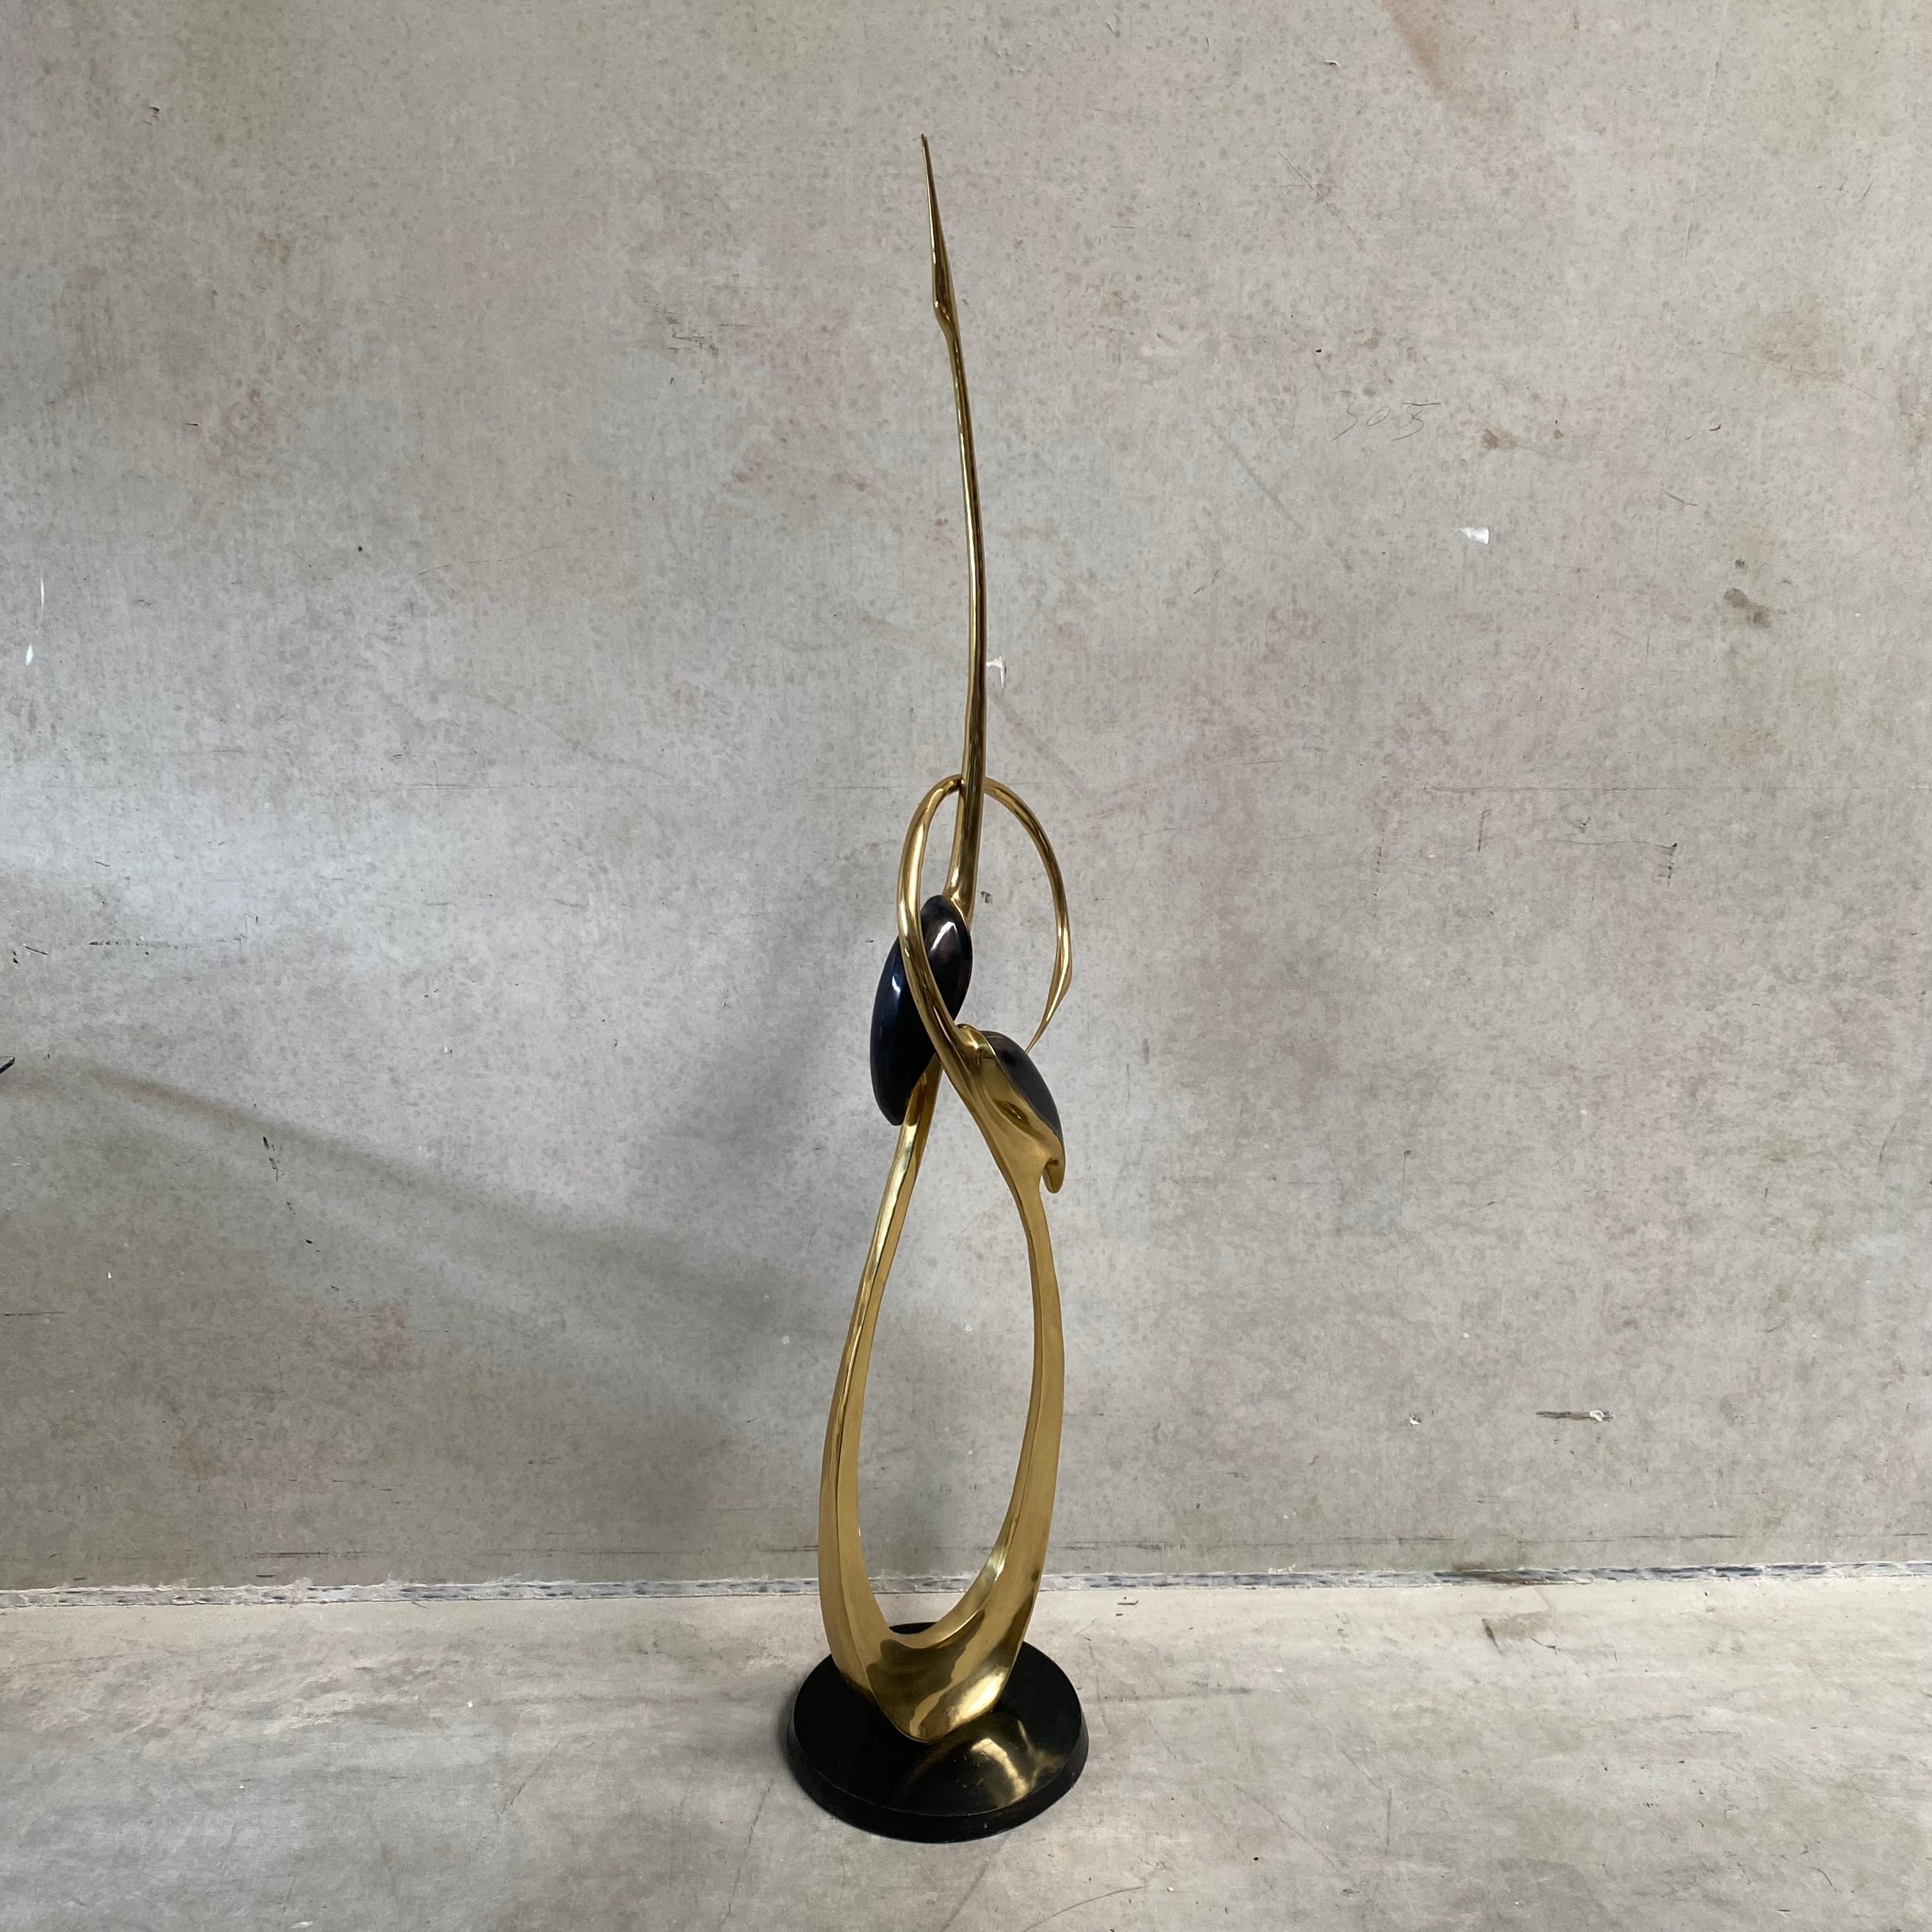 Tall Brass Entwined Cranes Sculpture by Boris Lovet Lorski For Sale 11